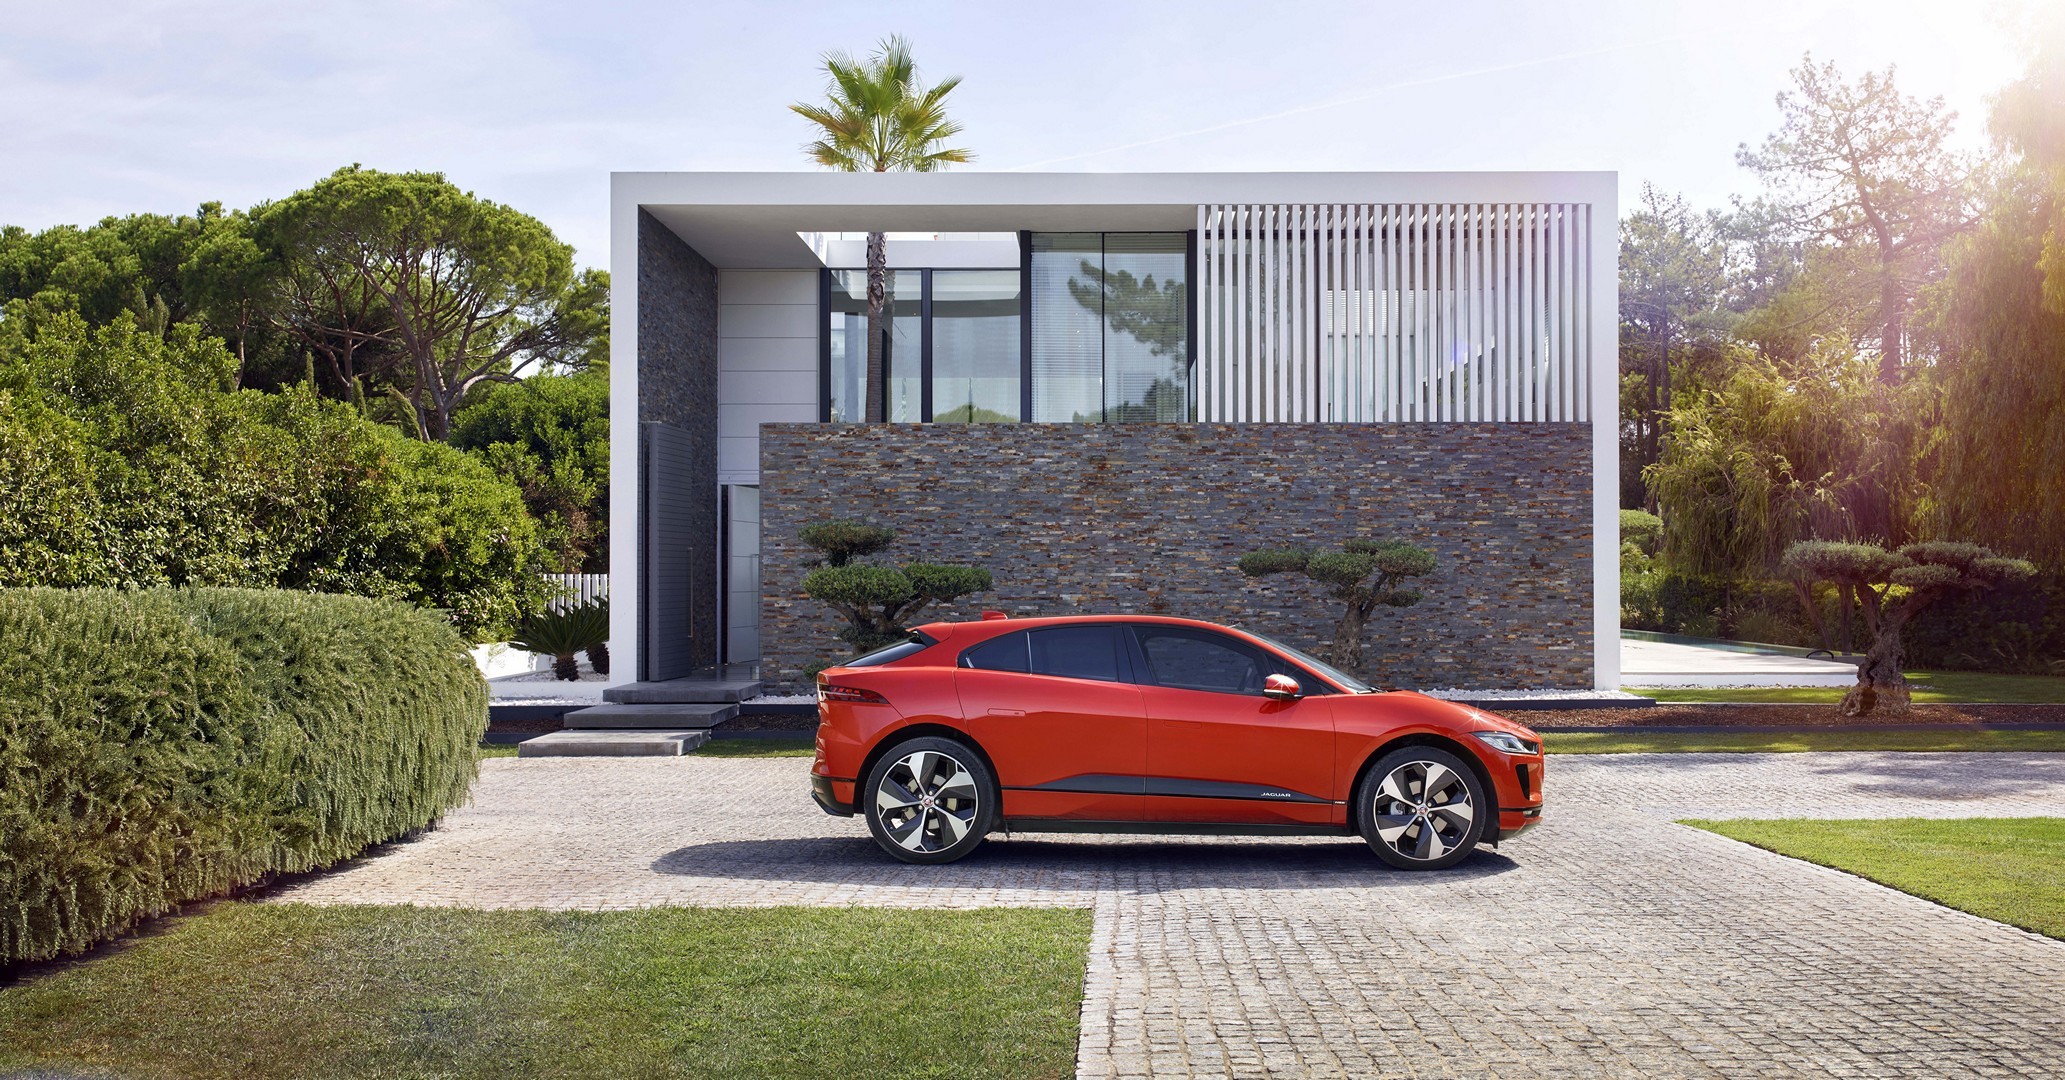 https://s1.cdn.autoevolution.com/images/news/gallery/2020-jaguar-i-pace-update-offers-234-miles-of-range-thanks-to-etrophy-know-how_39.jpg